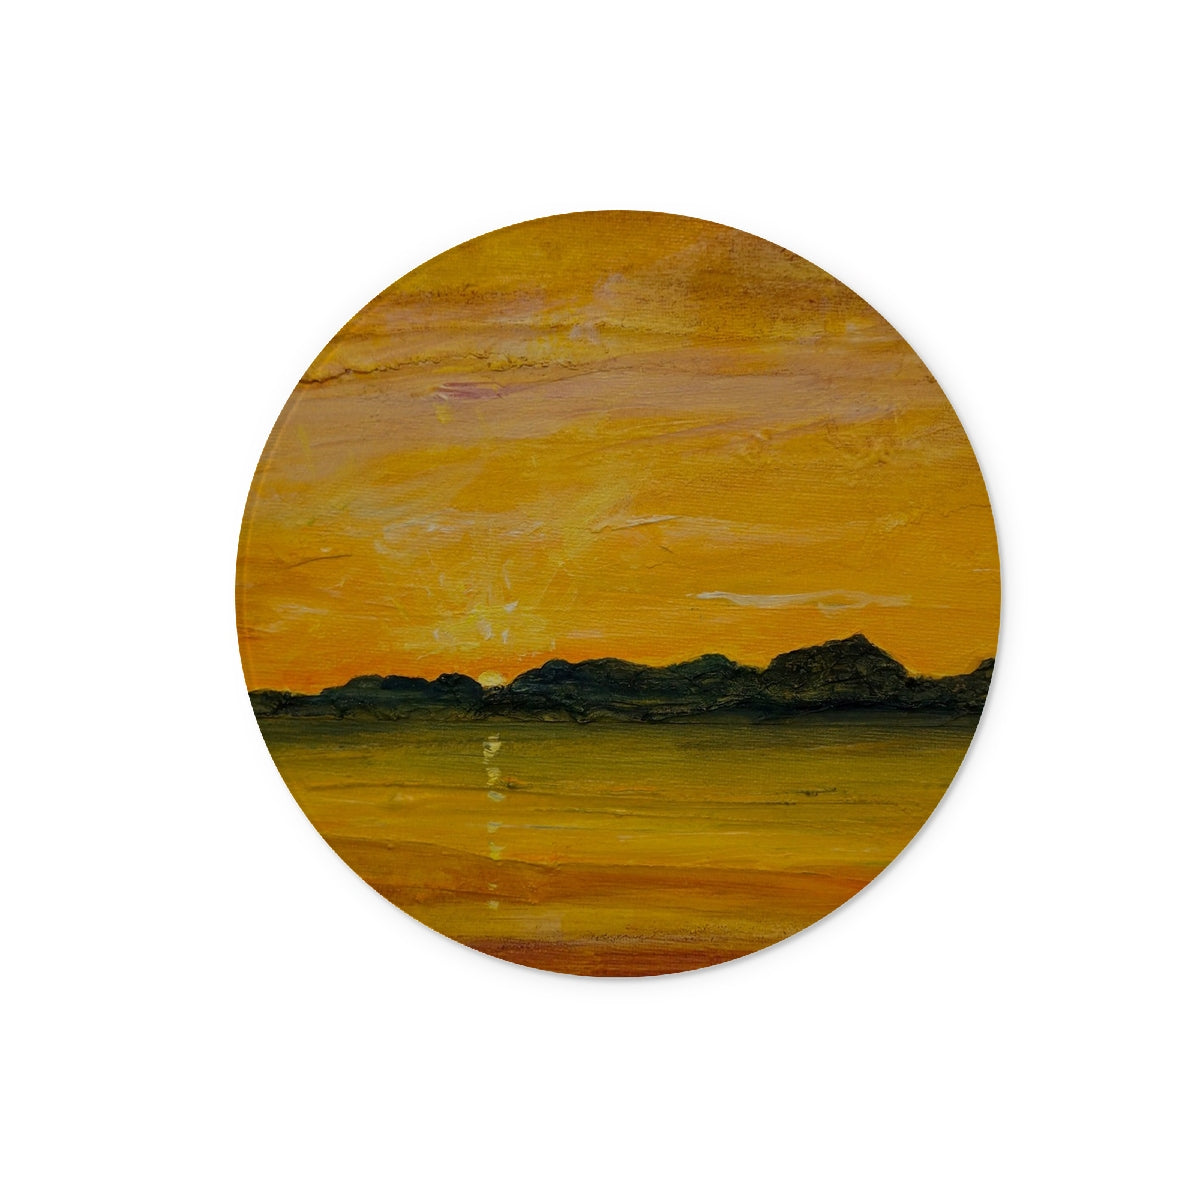 Jura Sunset Art Gifts Glass Chopping Board-Glass Chopping Boards-Hebridean Islands Art Gallery-12" Round-Paintings, Prints, Homeware, Art Gifts From Scotland By Scottish Artist Kevin Hunter